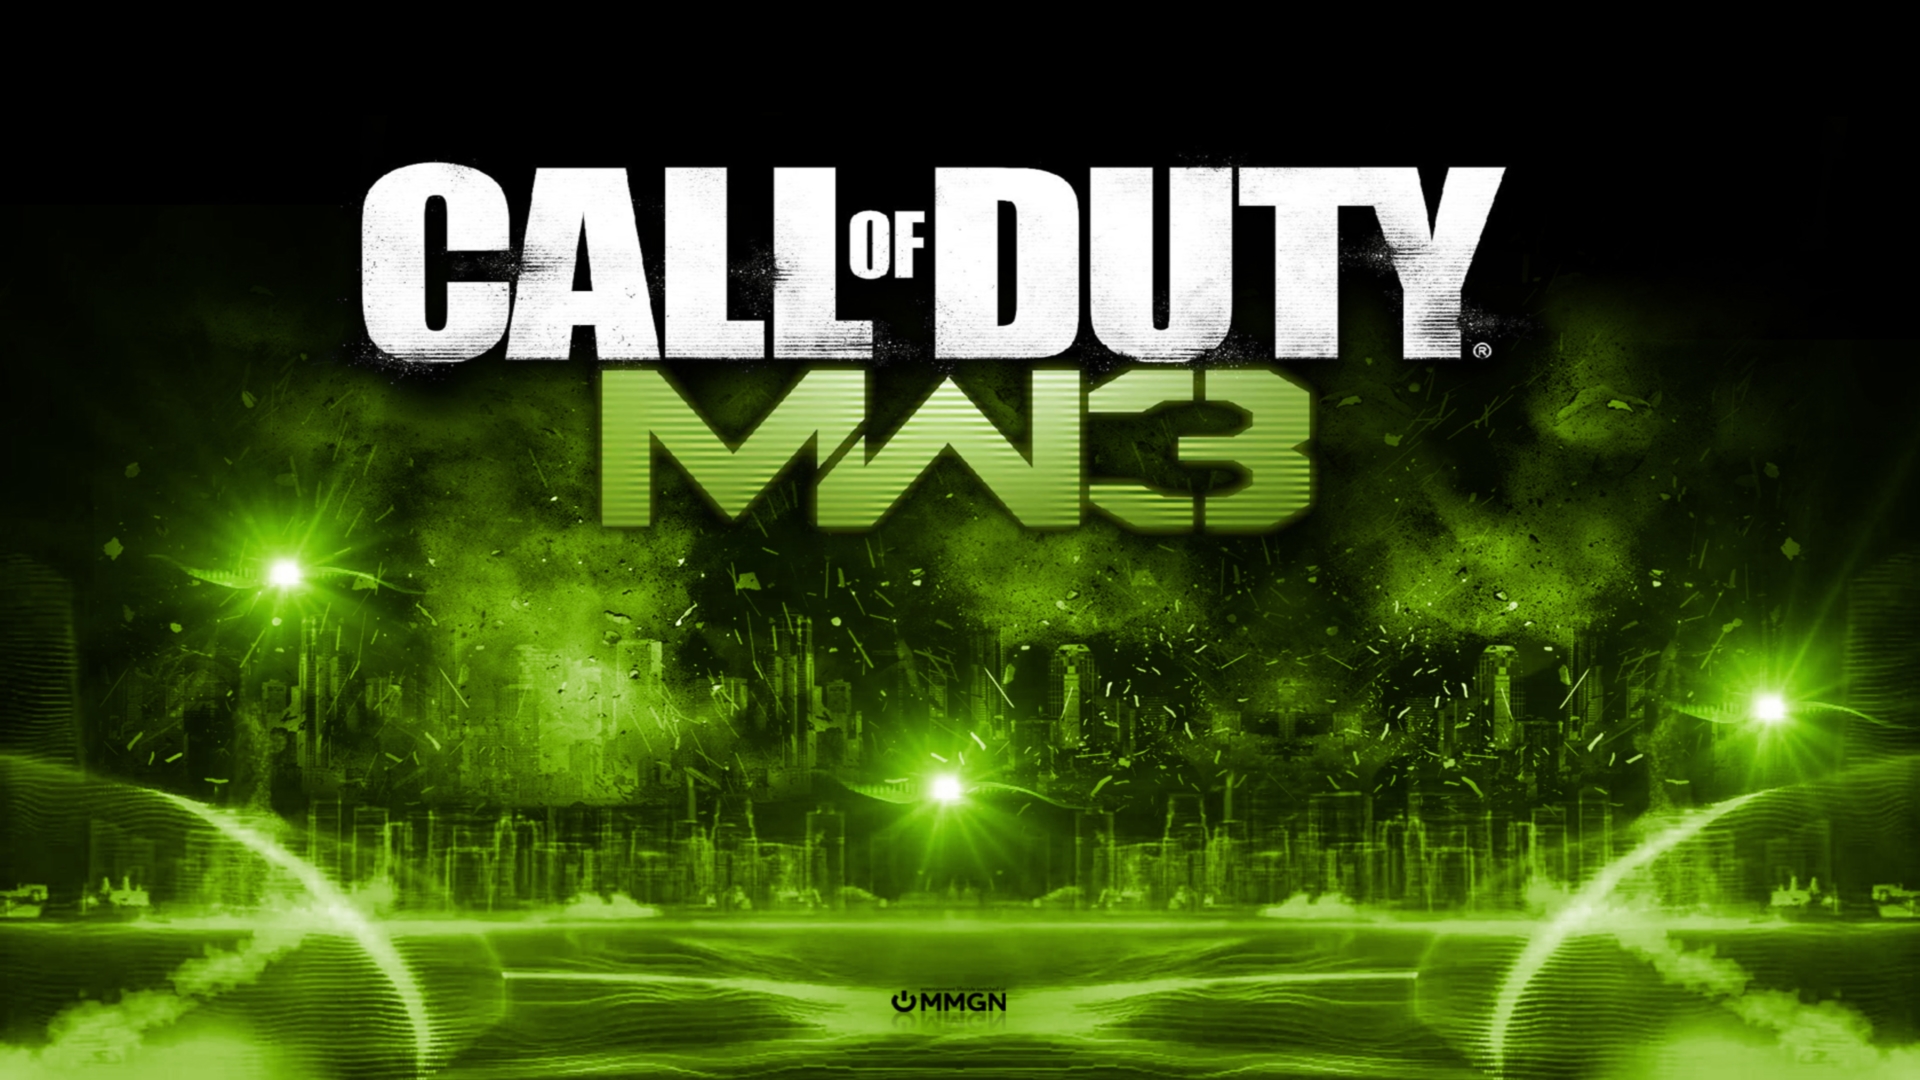 Here are a few Call Of Duty Modern Warfare 3 HD wallpapers